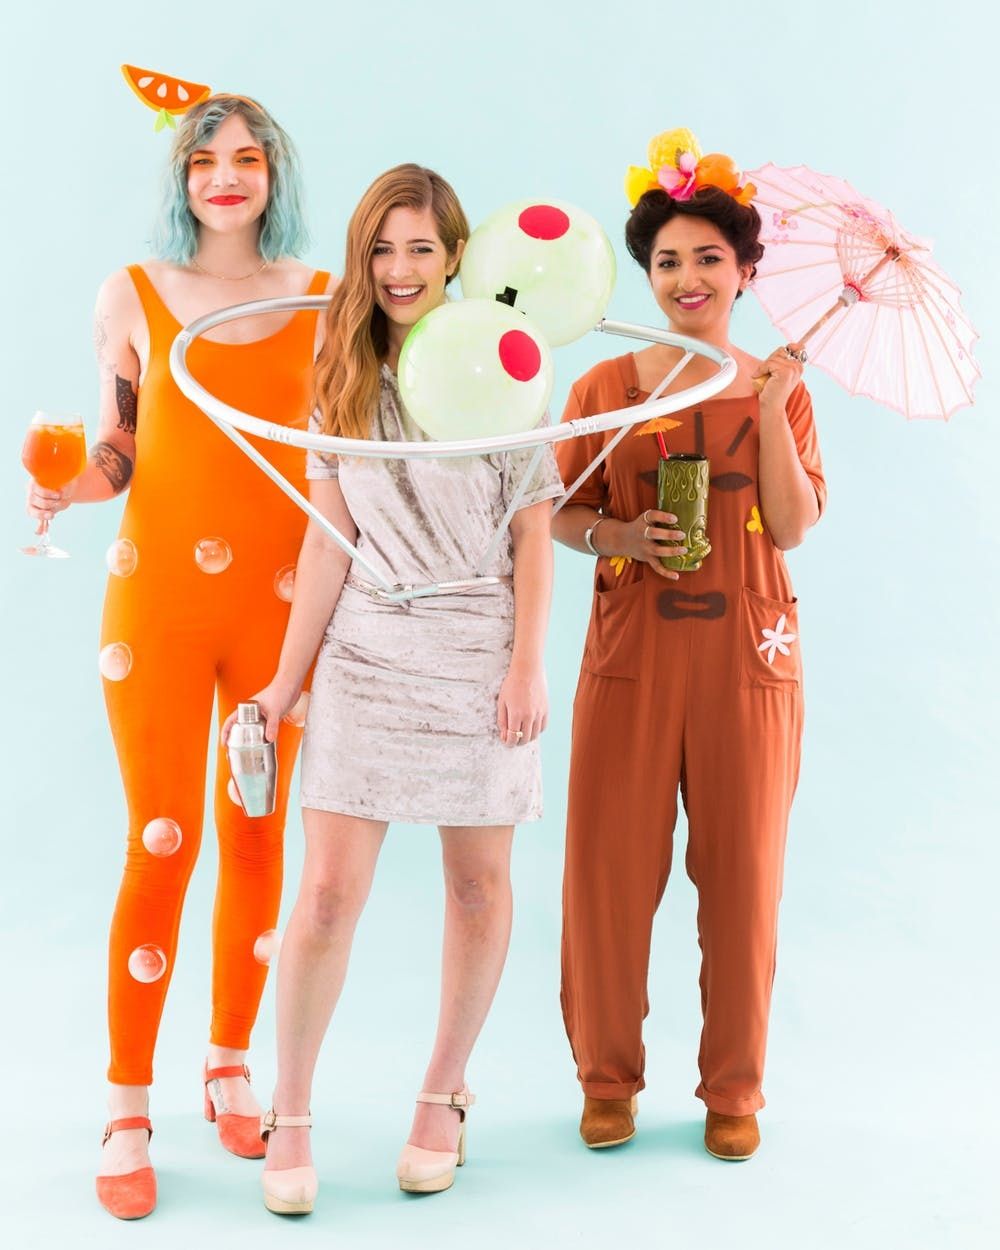 Get Your Drank on in These DIY Cocktail Party Halloween Costumes